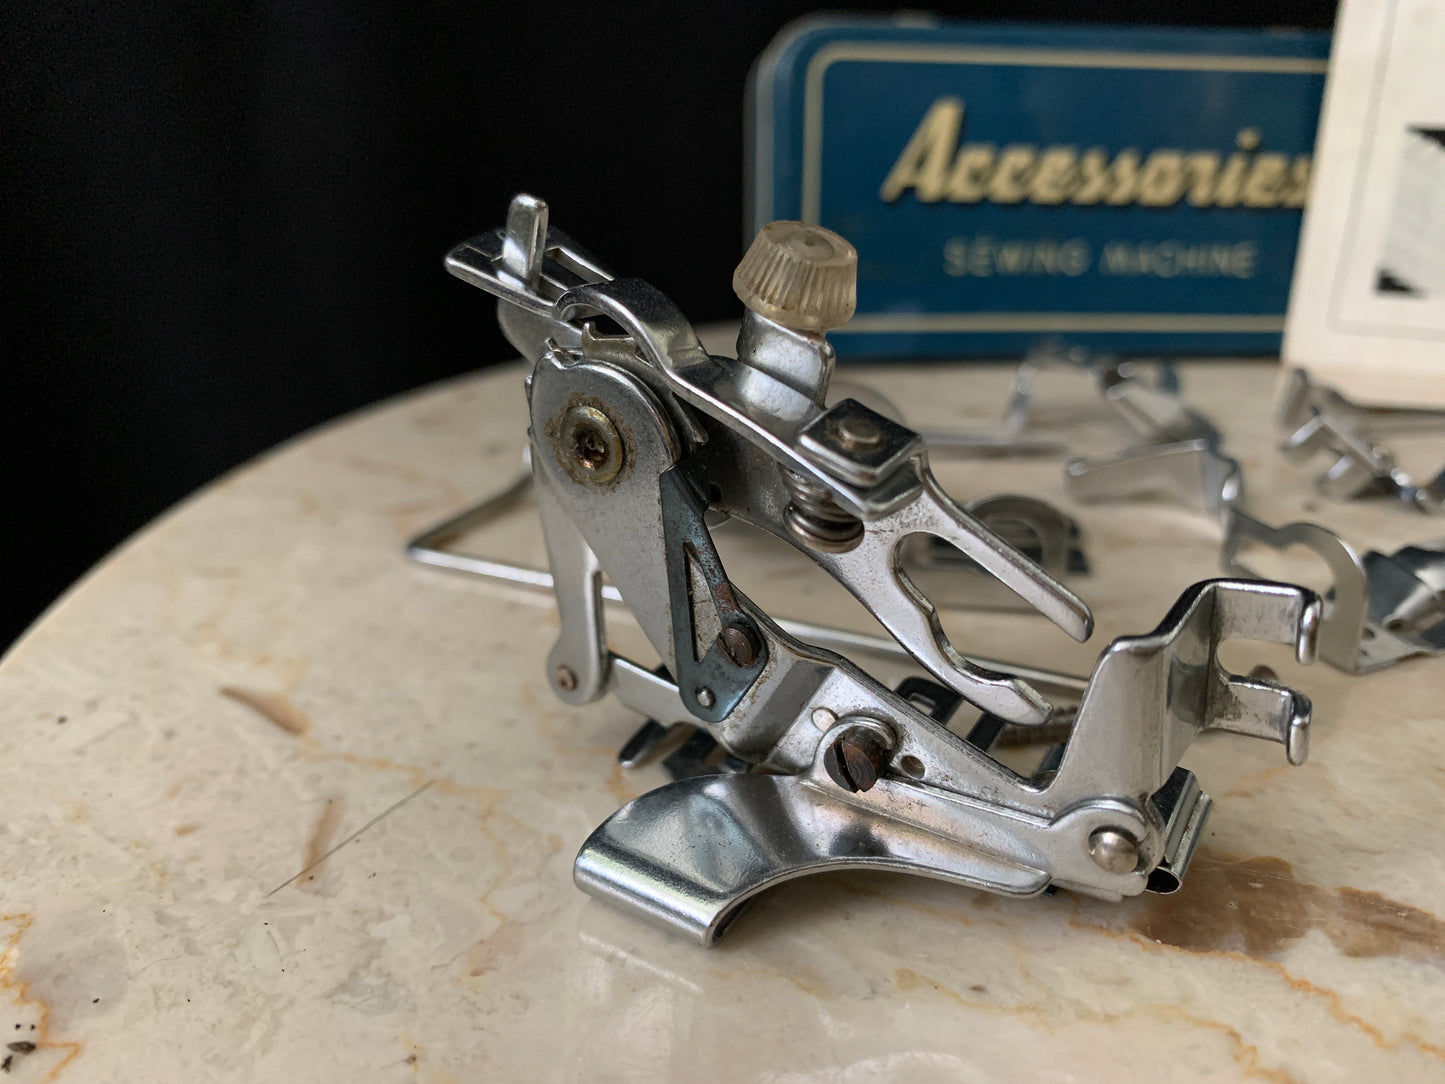 Sewing Machine Accessories with Tin